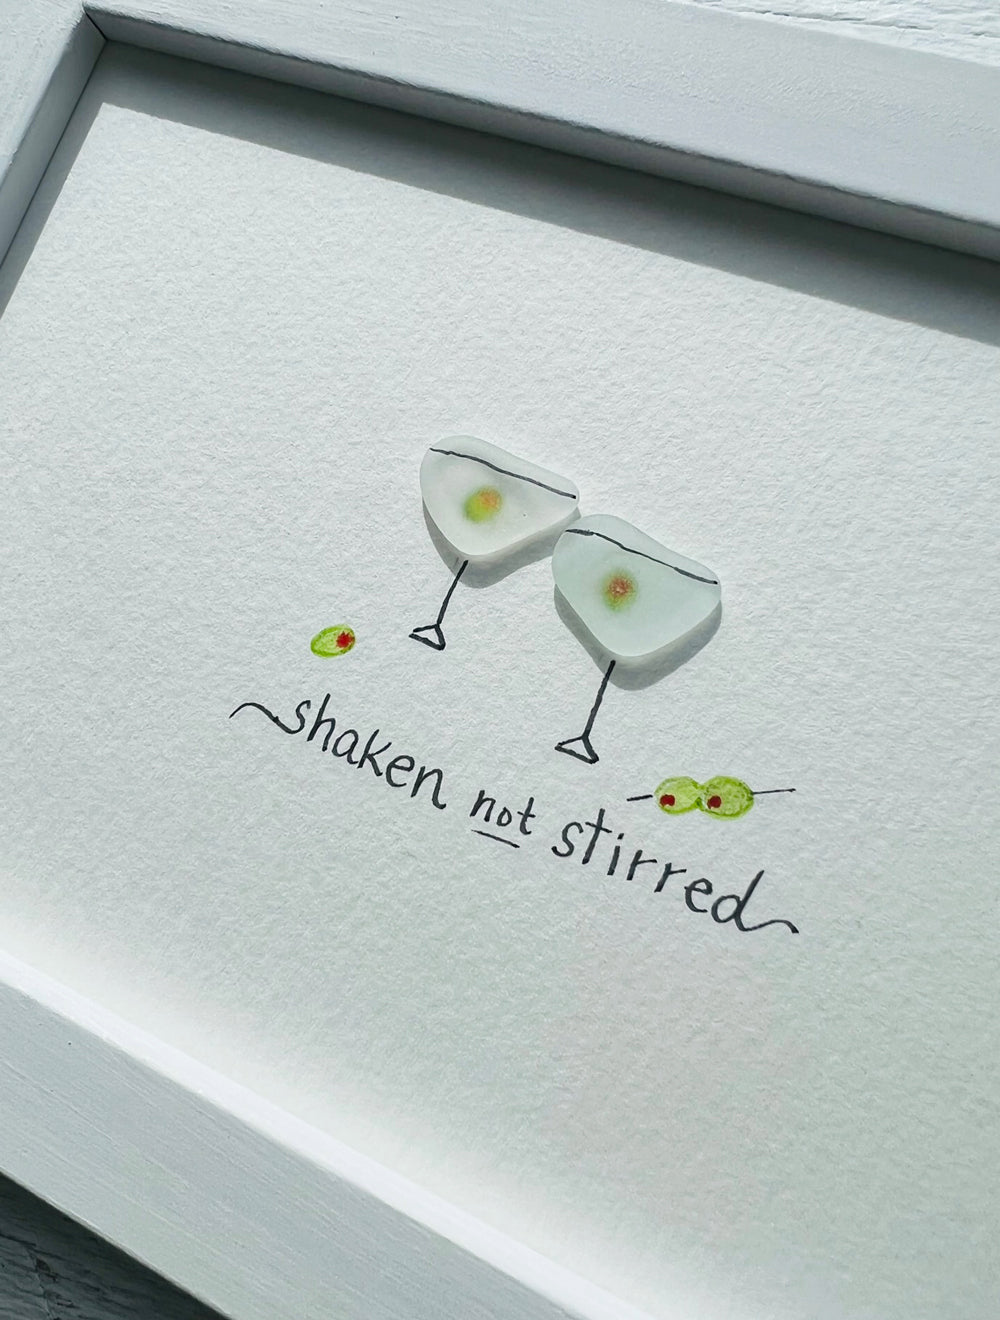 Cute Martinis with Olives Sea Glass Art